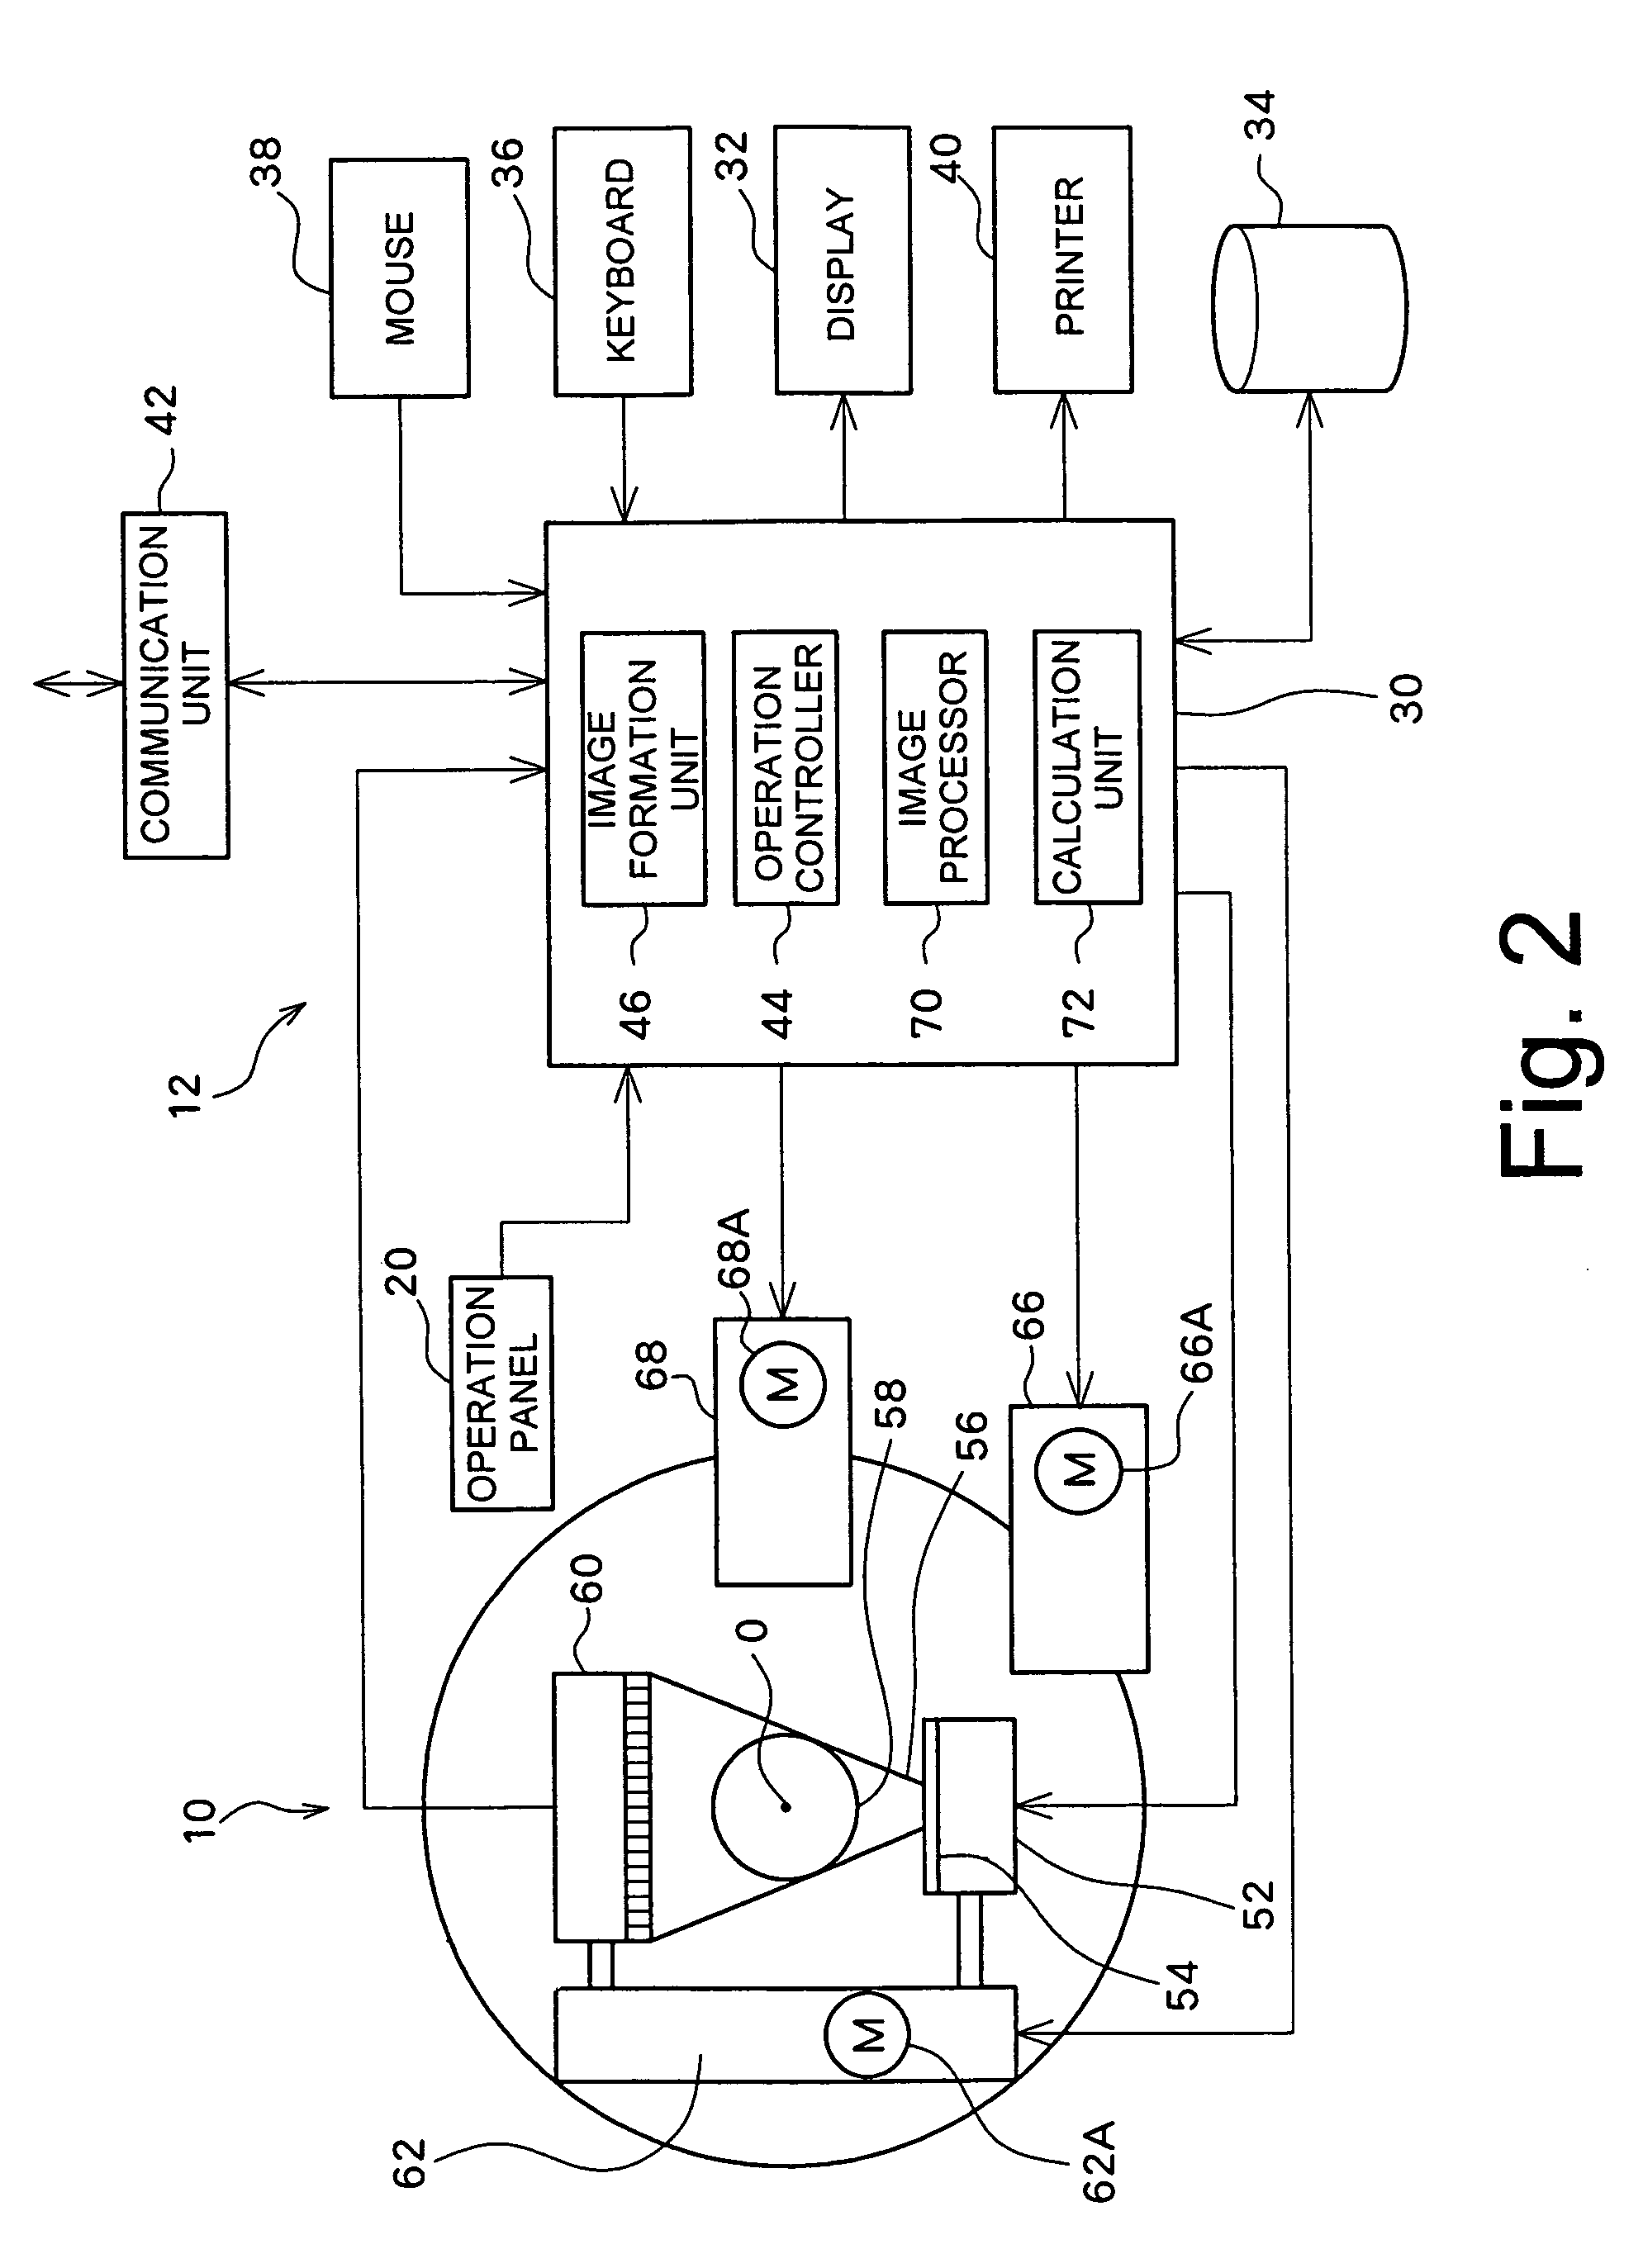 Computerized tomography device using X rays and image processing method